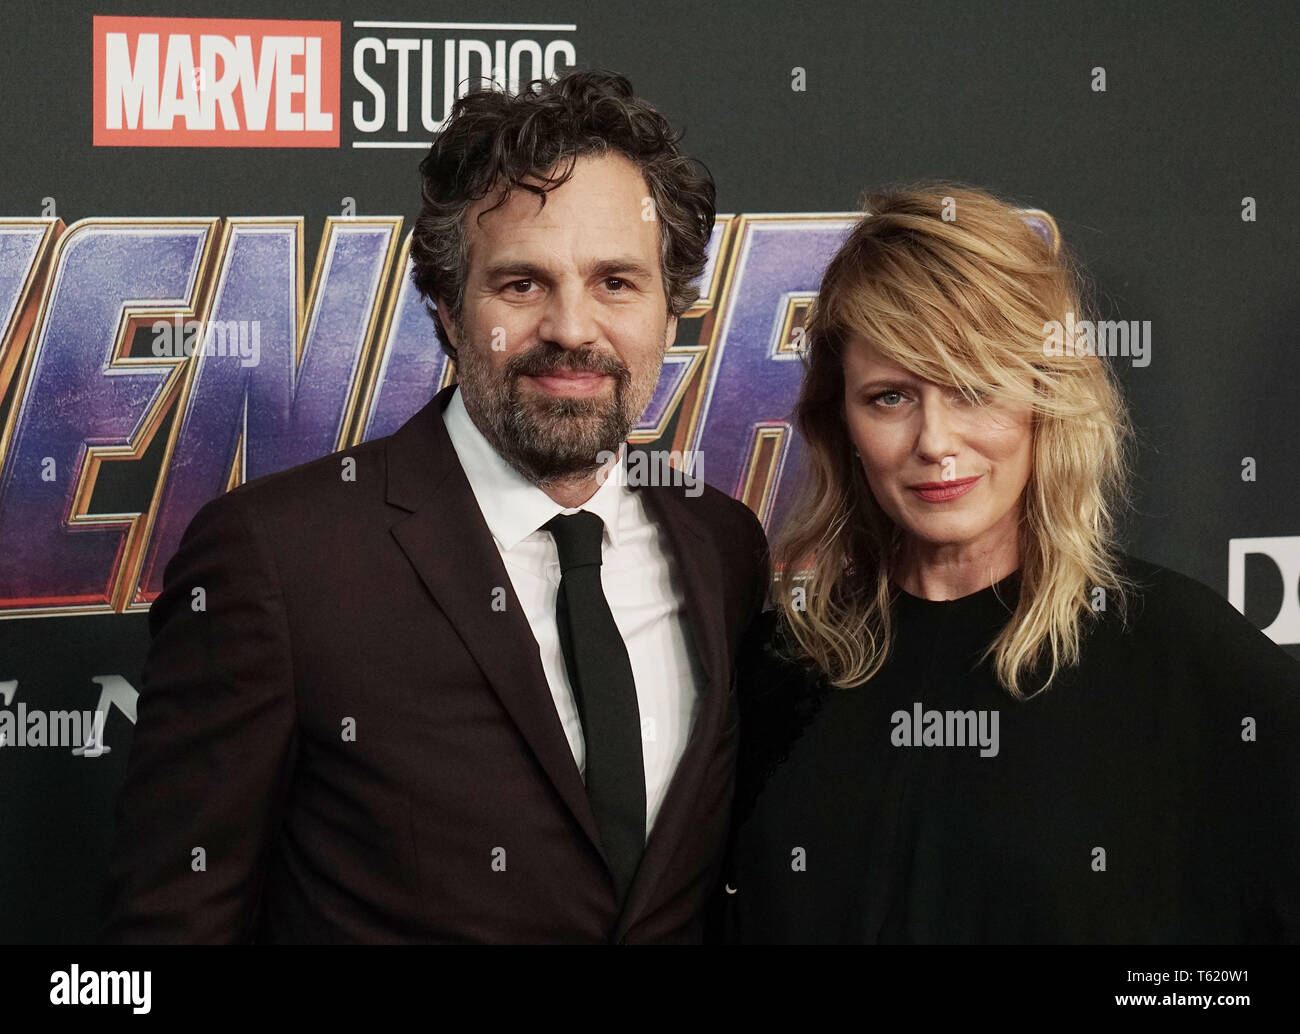 Mark Ruffalo, Sunrise Coigney 293 attends the World Premiere Of Walt Disney Studios Motion Pictures Avengers Endgame at Los Angeles Convention Center on April 22, 2019 in Los Angeles, California. Stock Photo